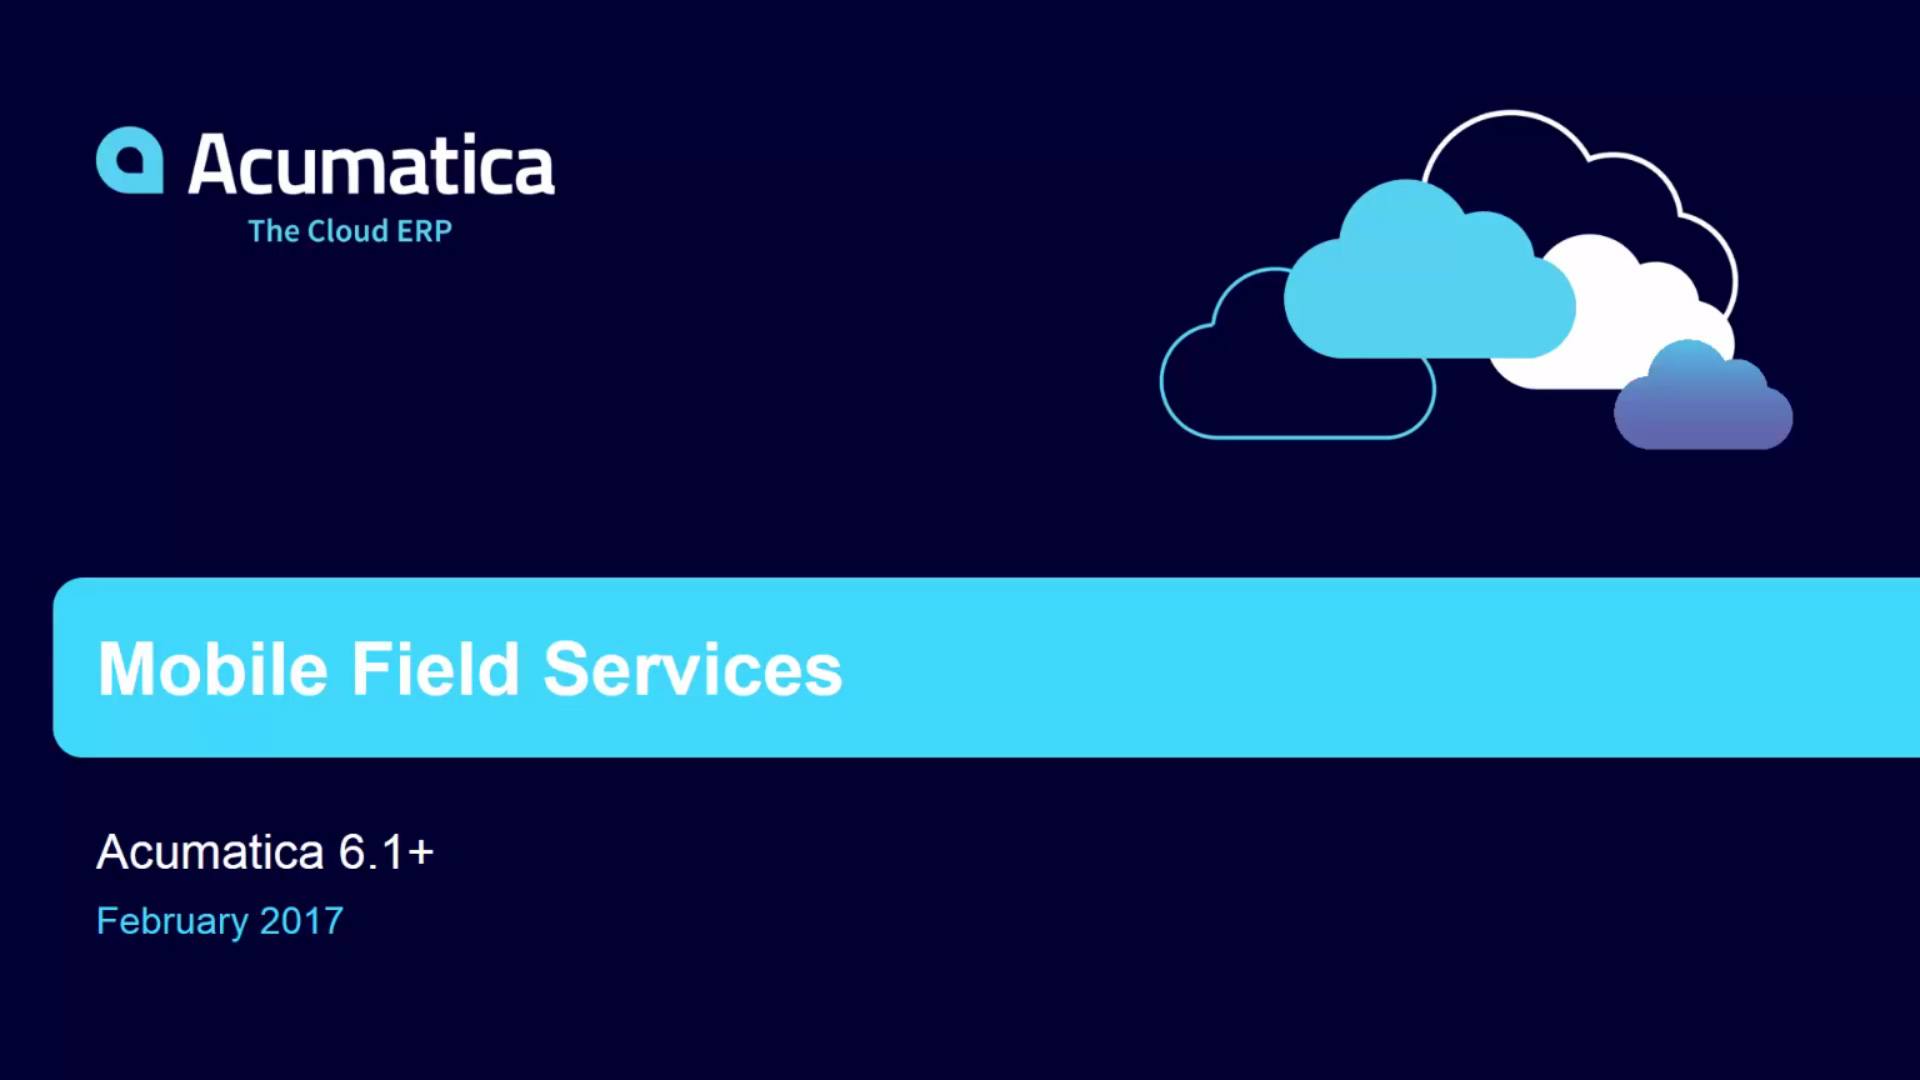 Mobile Field Services